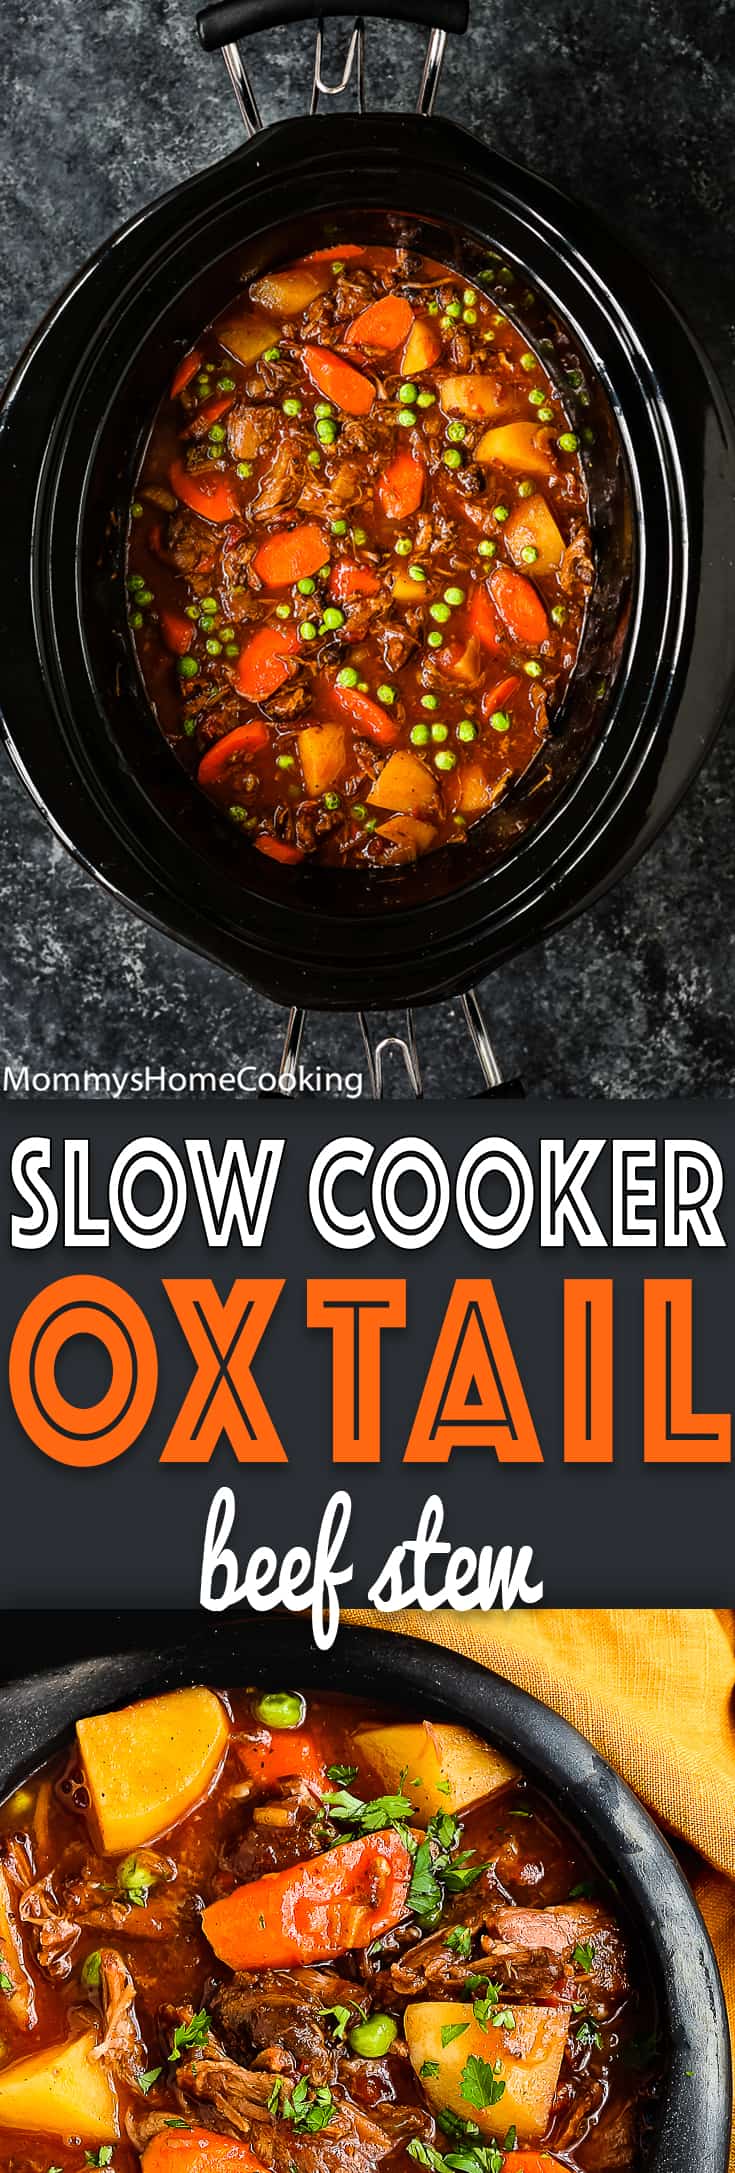 Slow Cooker Oxtail Stew [Video] - Mommy's Home Cooking